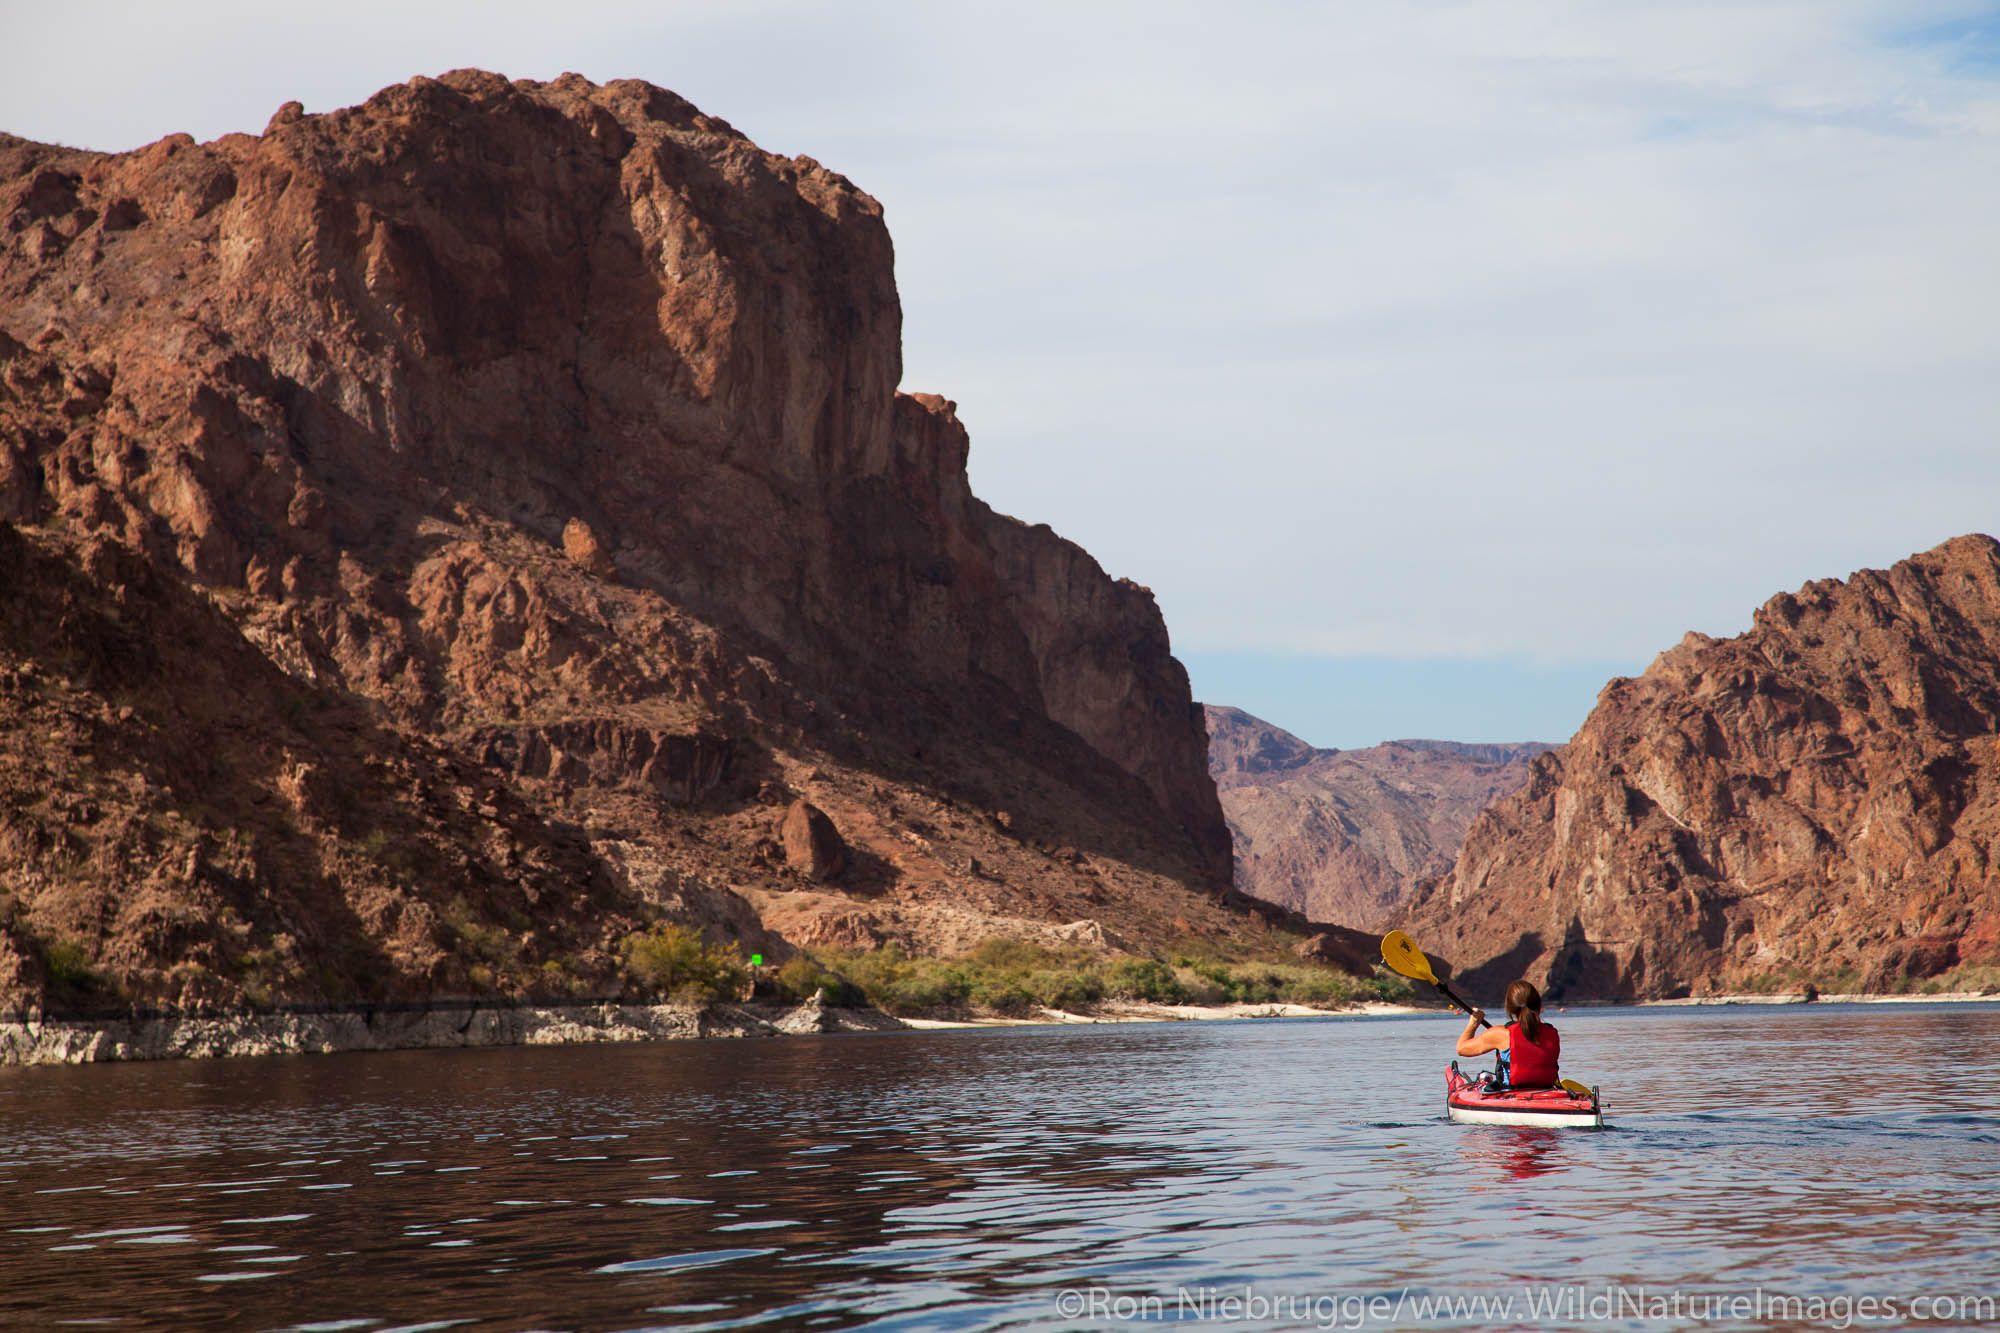 Kayking Black Canyon on the Colorado River, Mojave Desert. (model released)